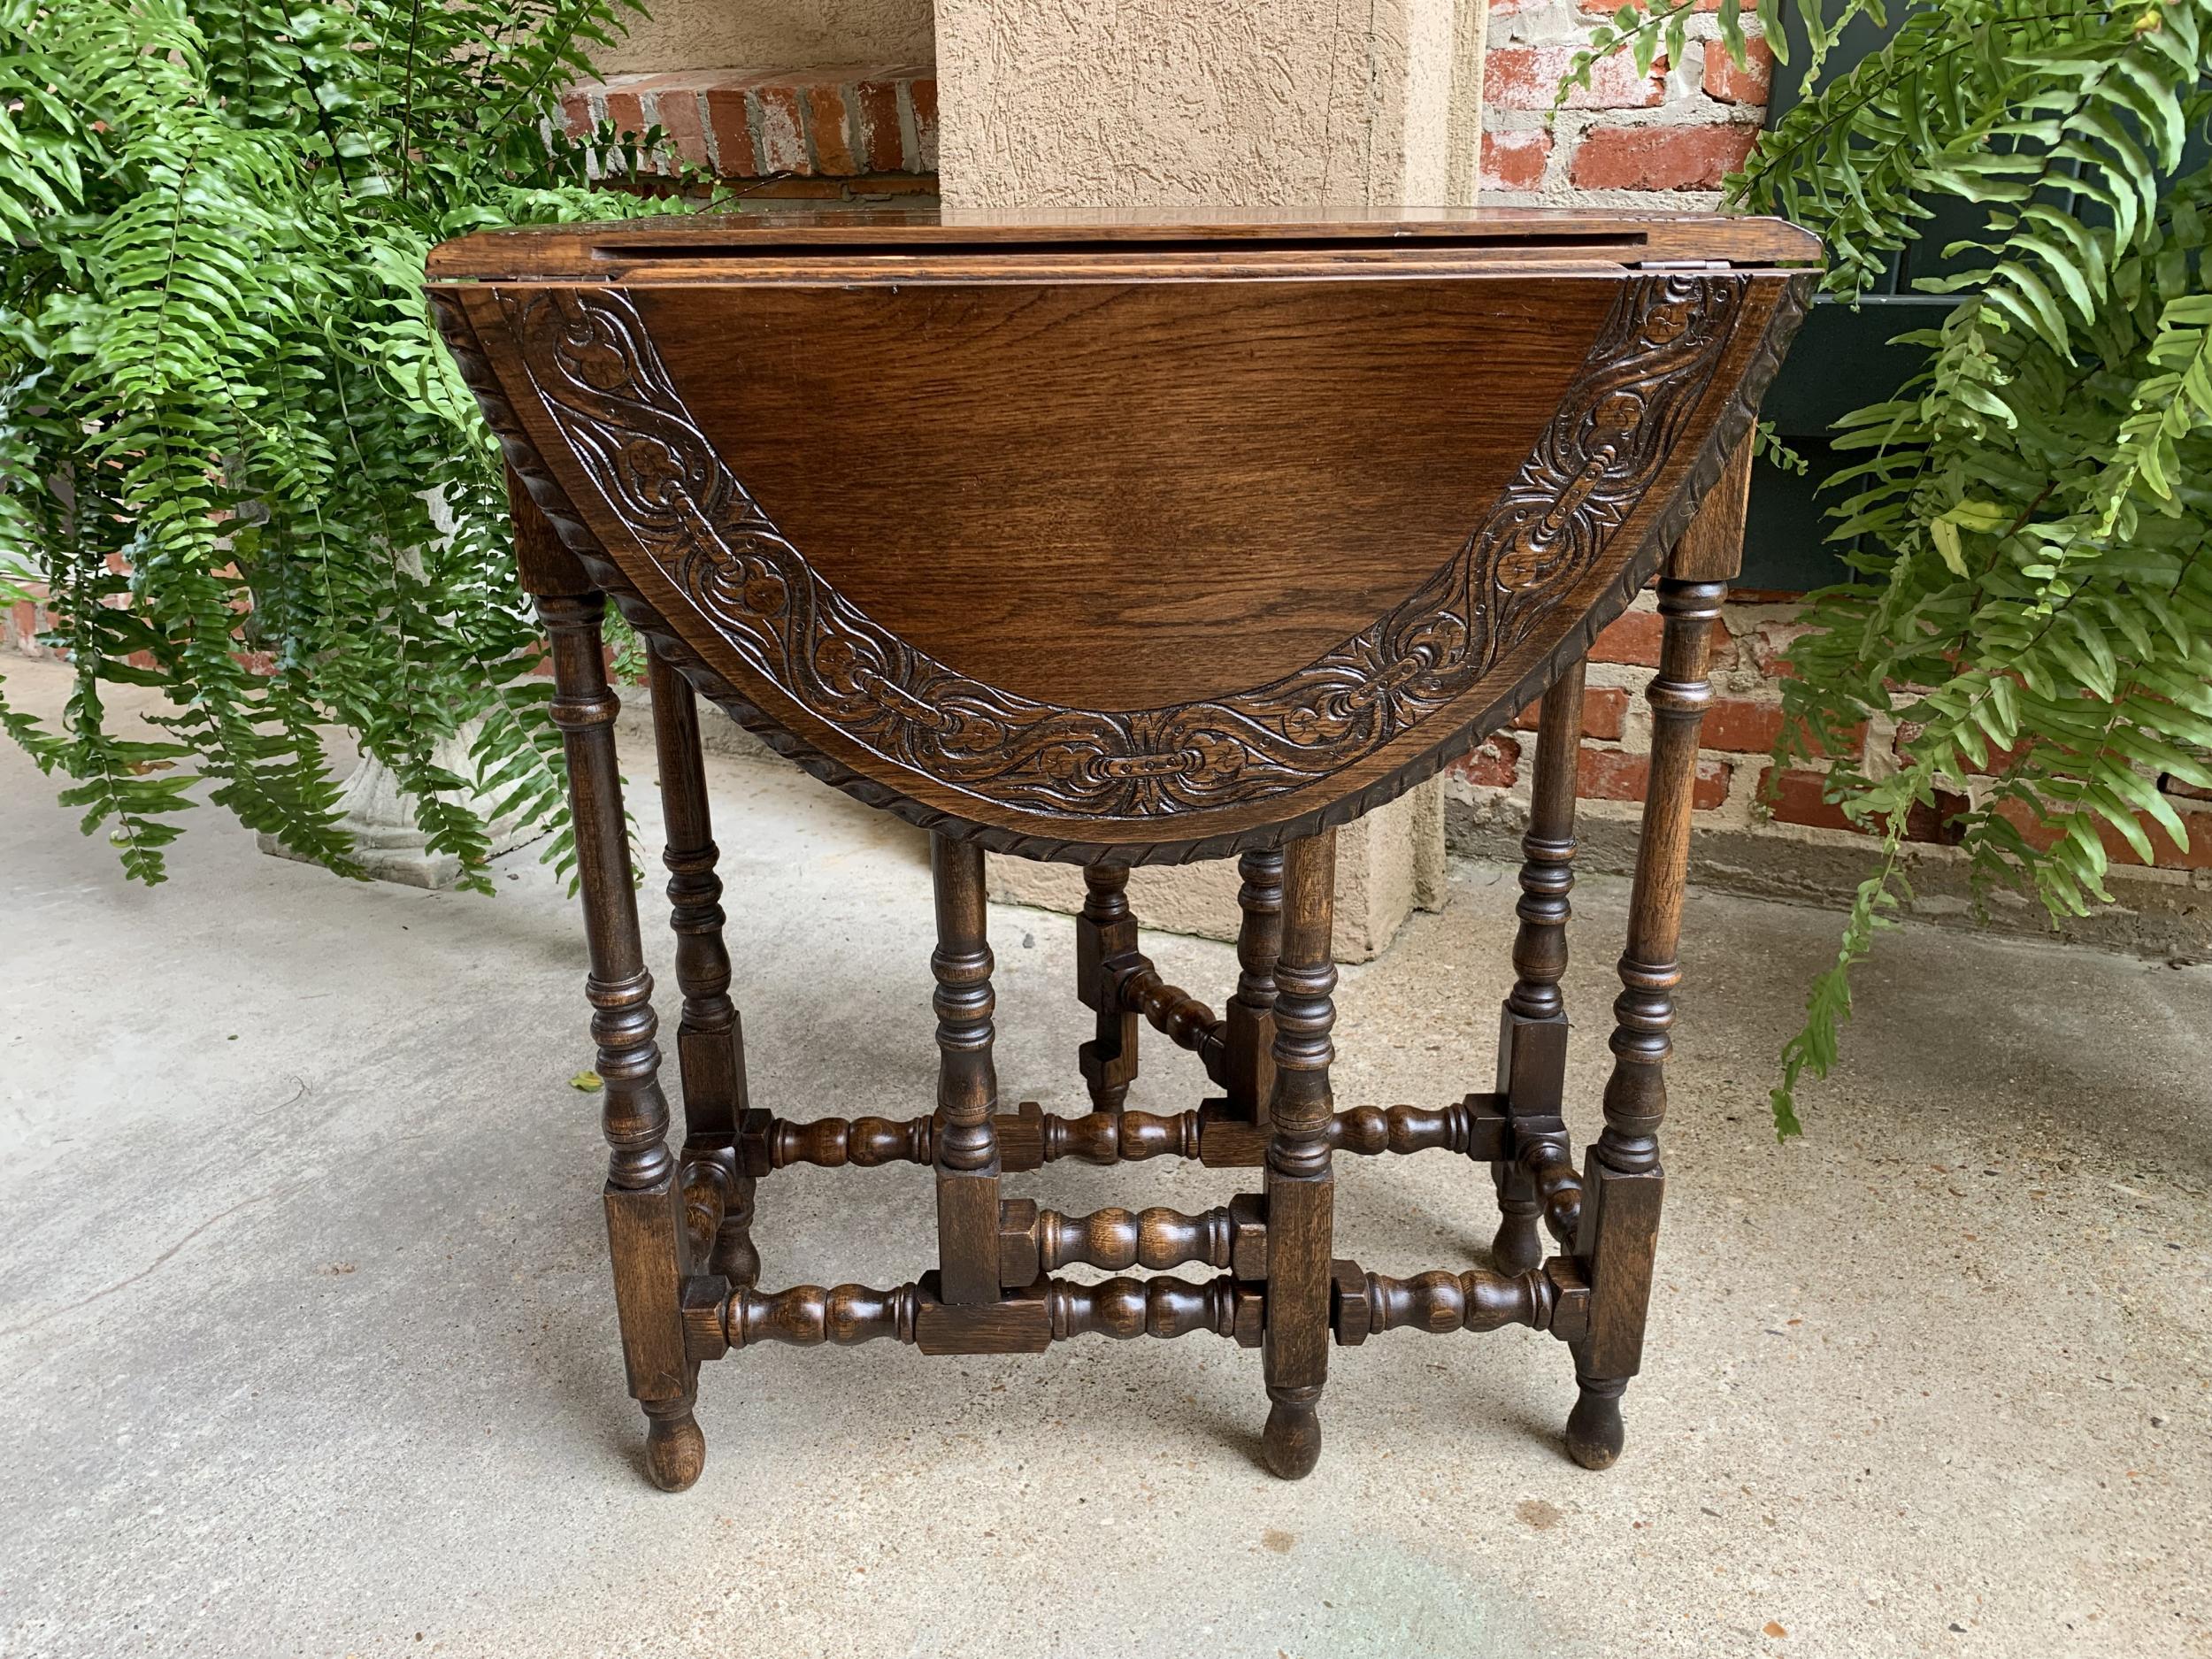 Petite antique English oak side sofa wine table drop leaf gate leg carved oval
 
~Direct from England~
~A beautiful antique English oak gate leg, drop leaf table. It is a very petite size, which is the smallest size drop leaf table available (and